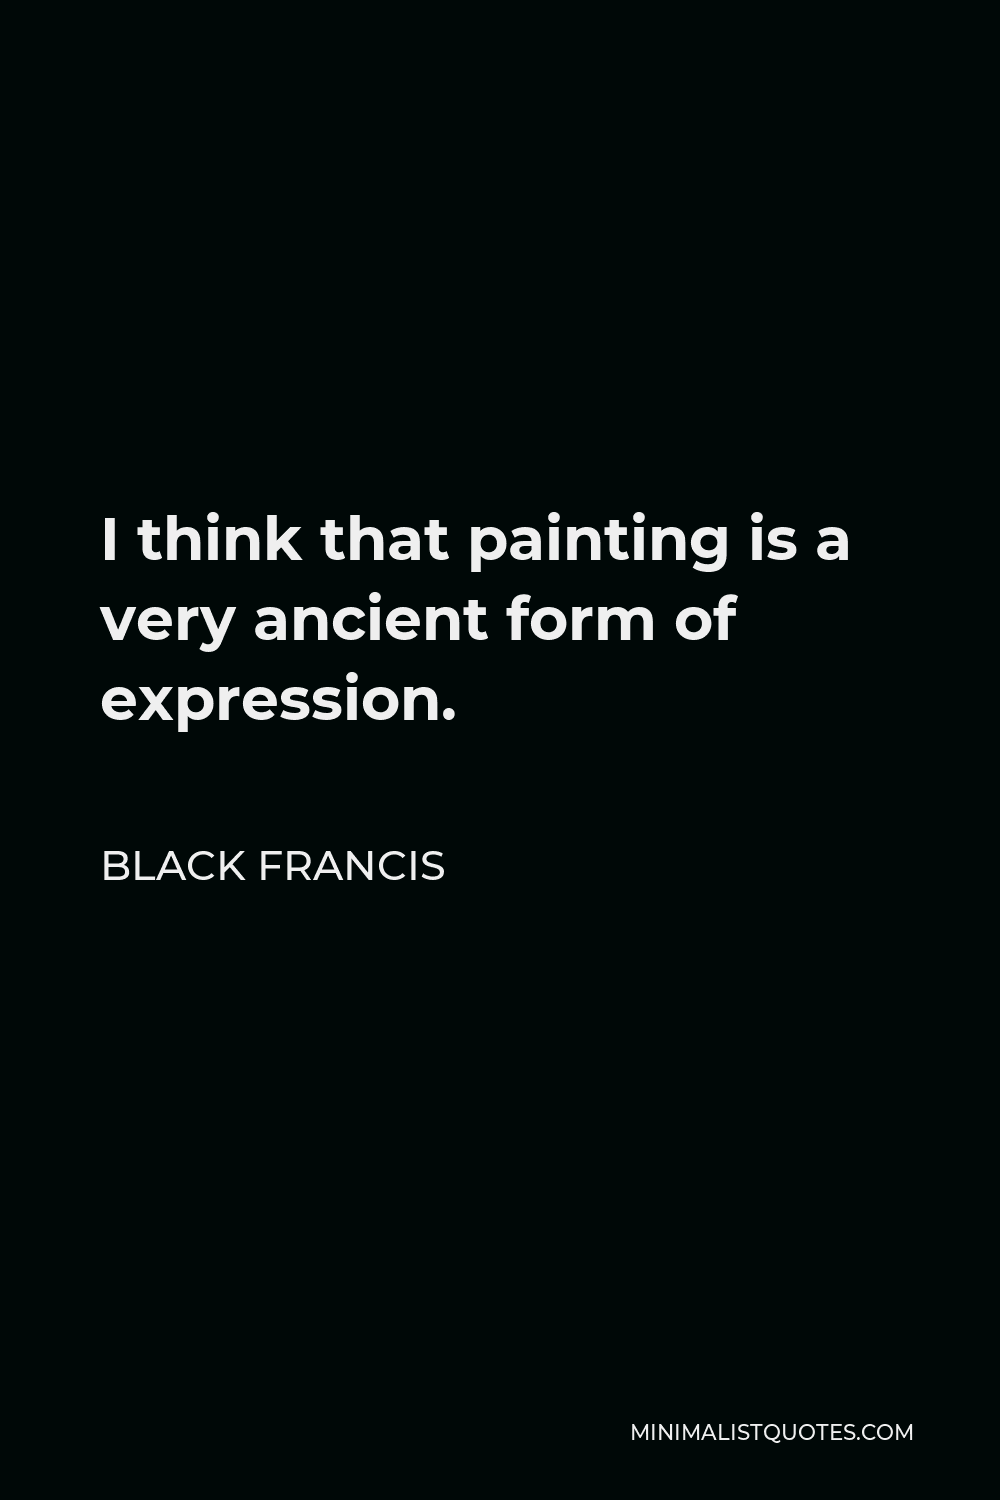 Black Francis Quote - I think that painting is a very ancient form of expression.